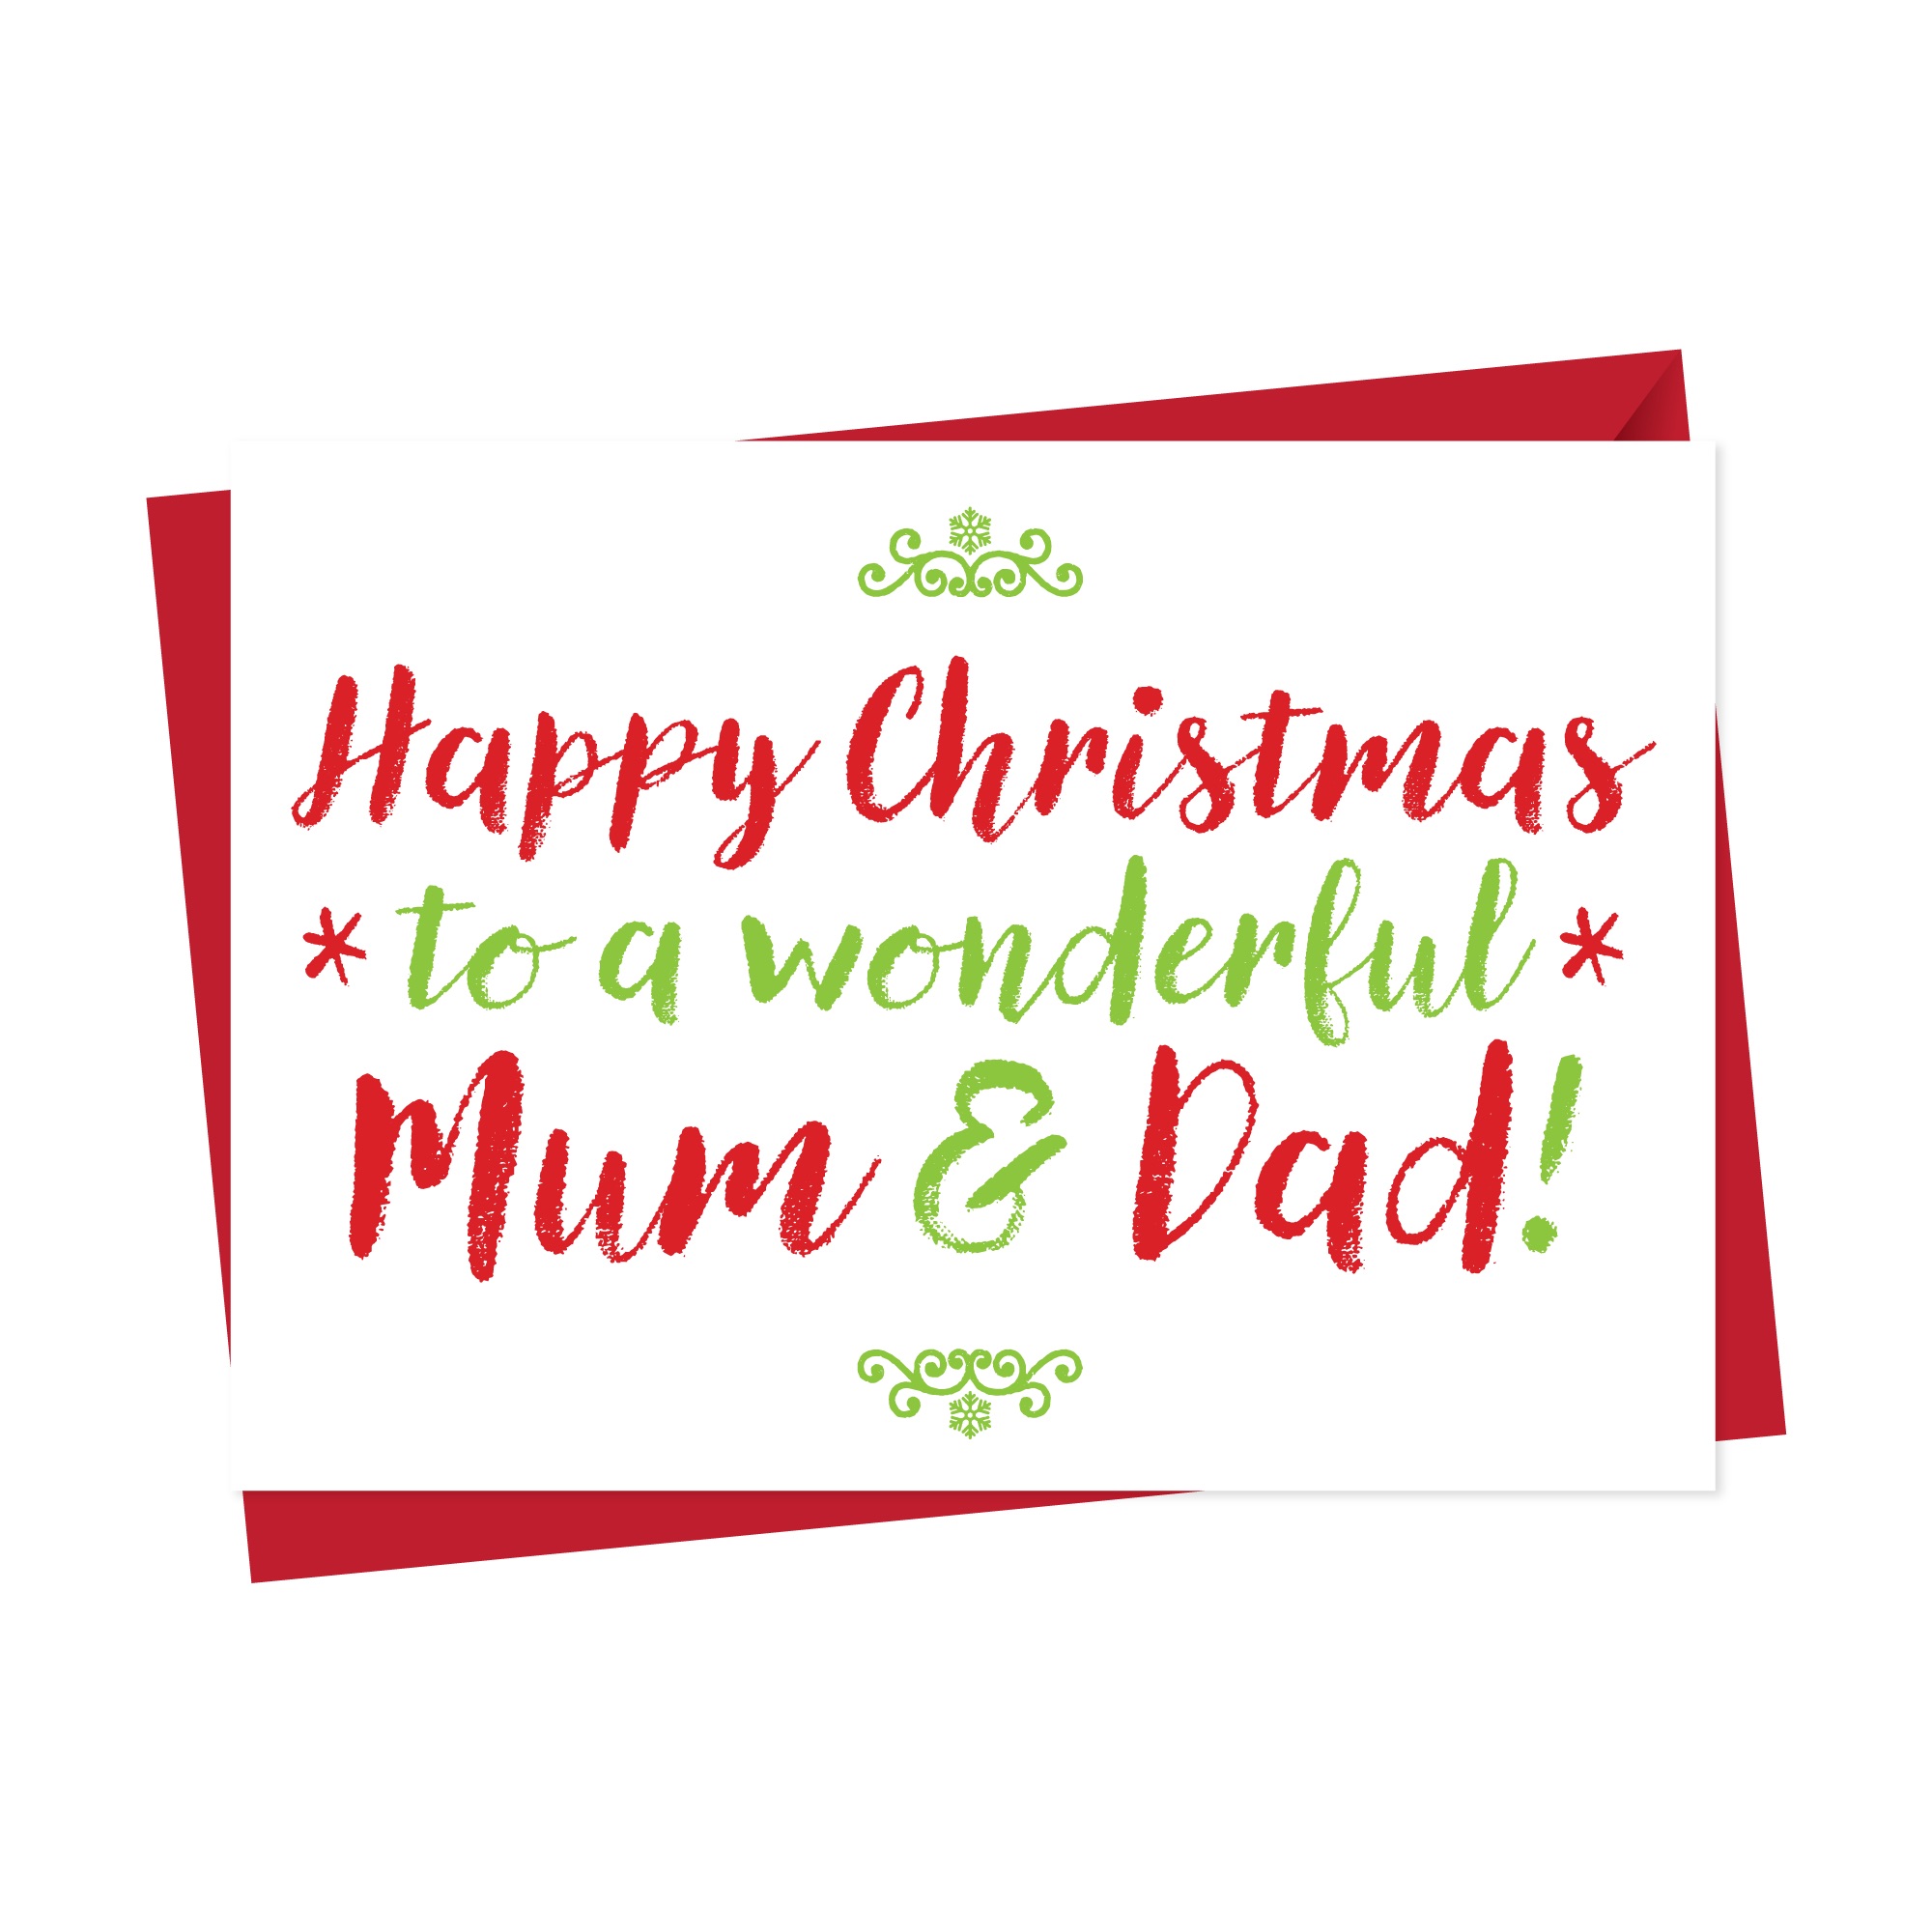 Christmas Card For Wonderful Mum And Dad